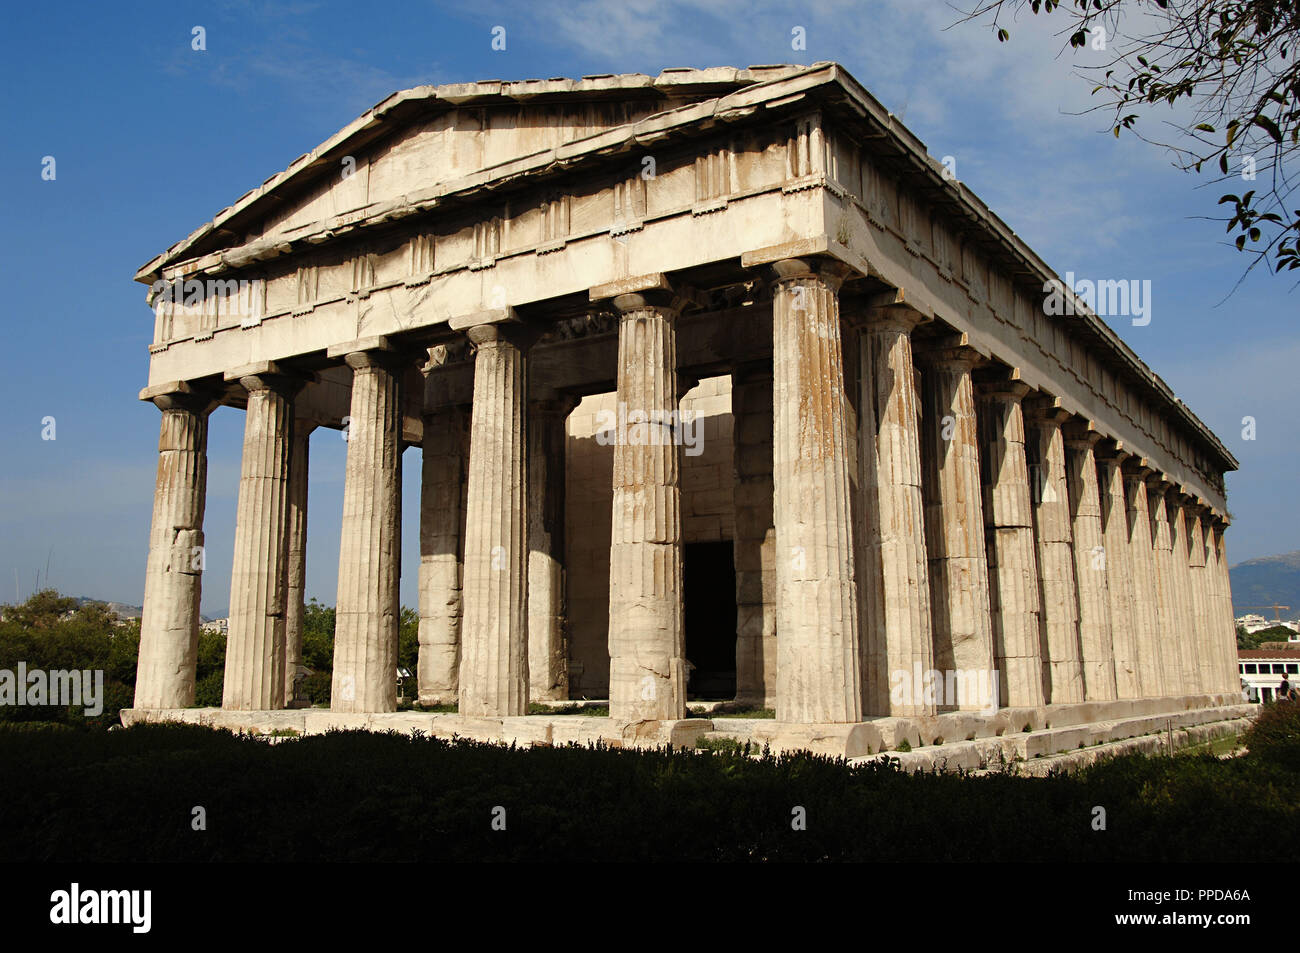 GREEK ART. GREECE. THESEION-HEPHAISTEION. V century. Doric temple built in pentelic marble  at time of Pericles (449-425 BC). Was devoted to Hephaesto (or Vulcan), and Athena. Greek agora. Athens. Stock Photo